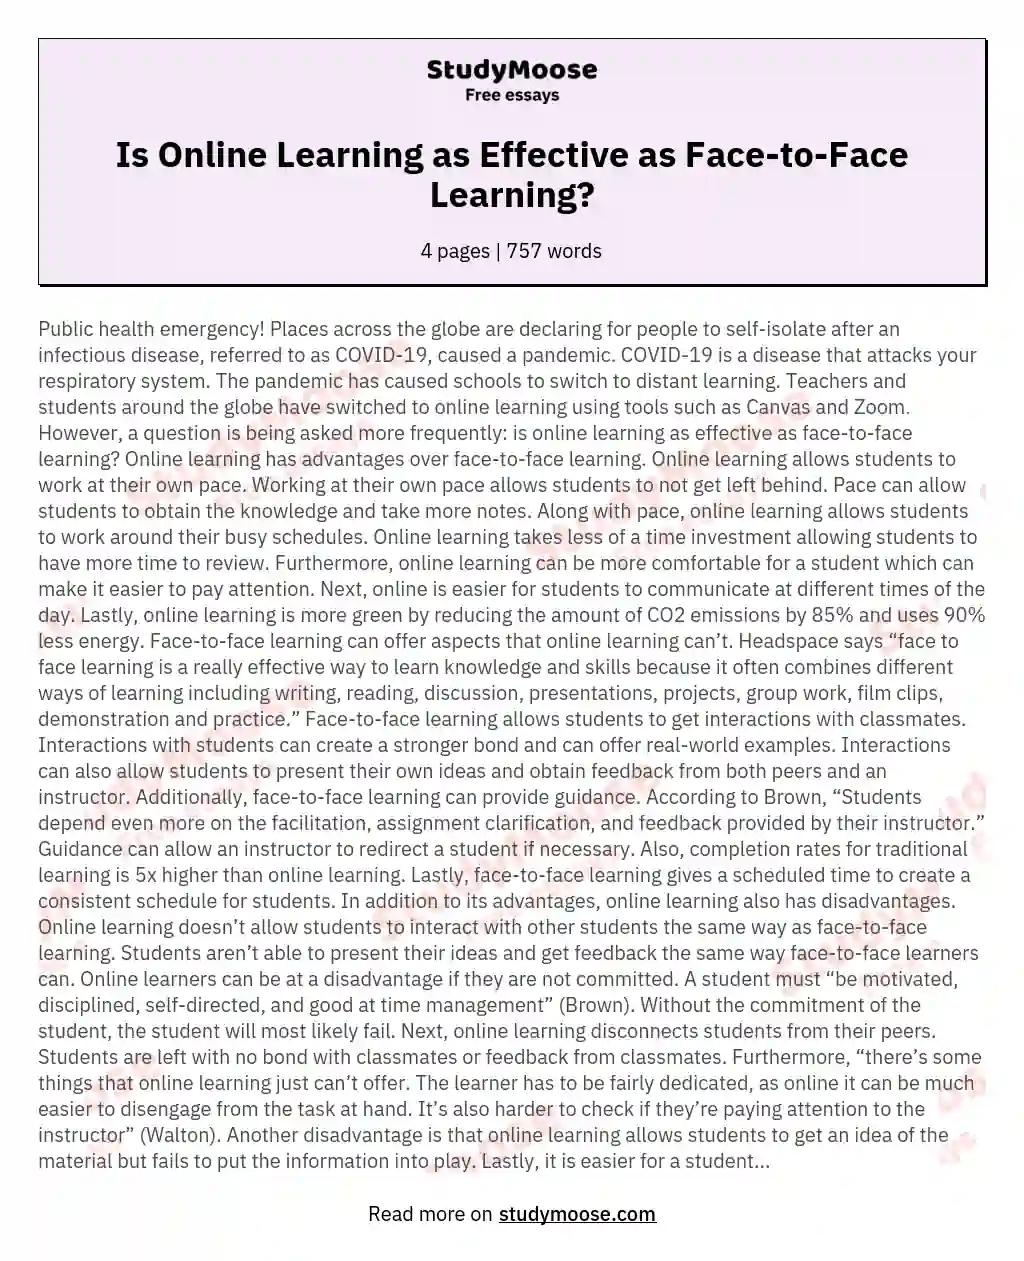 Is Online Learning as Effective as Face-to-Face Learning? essay